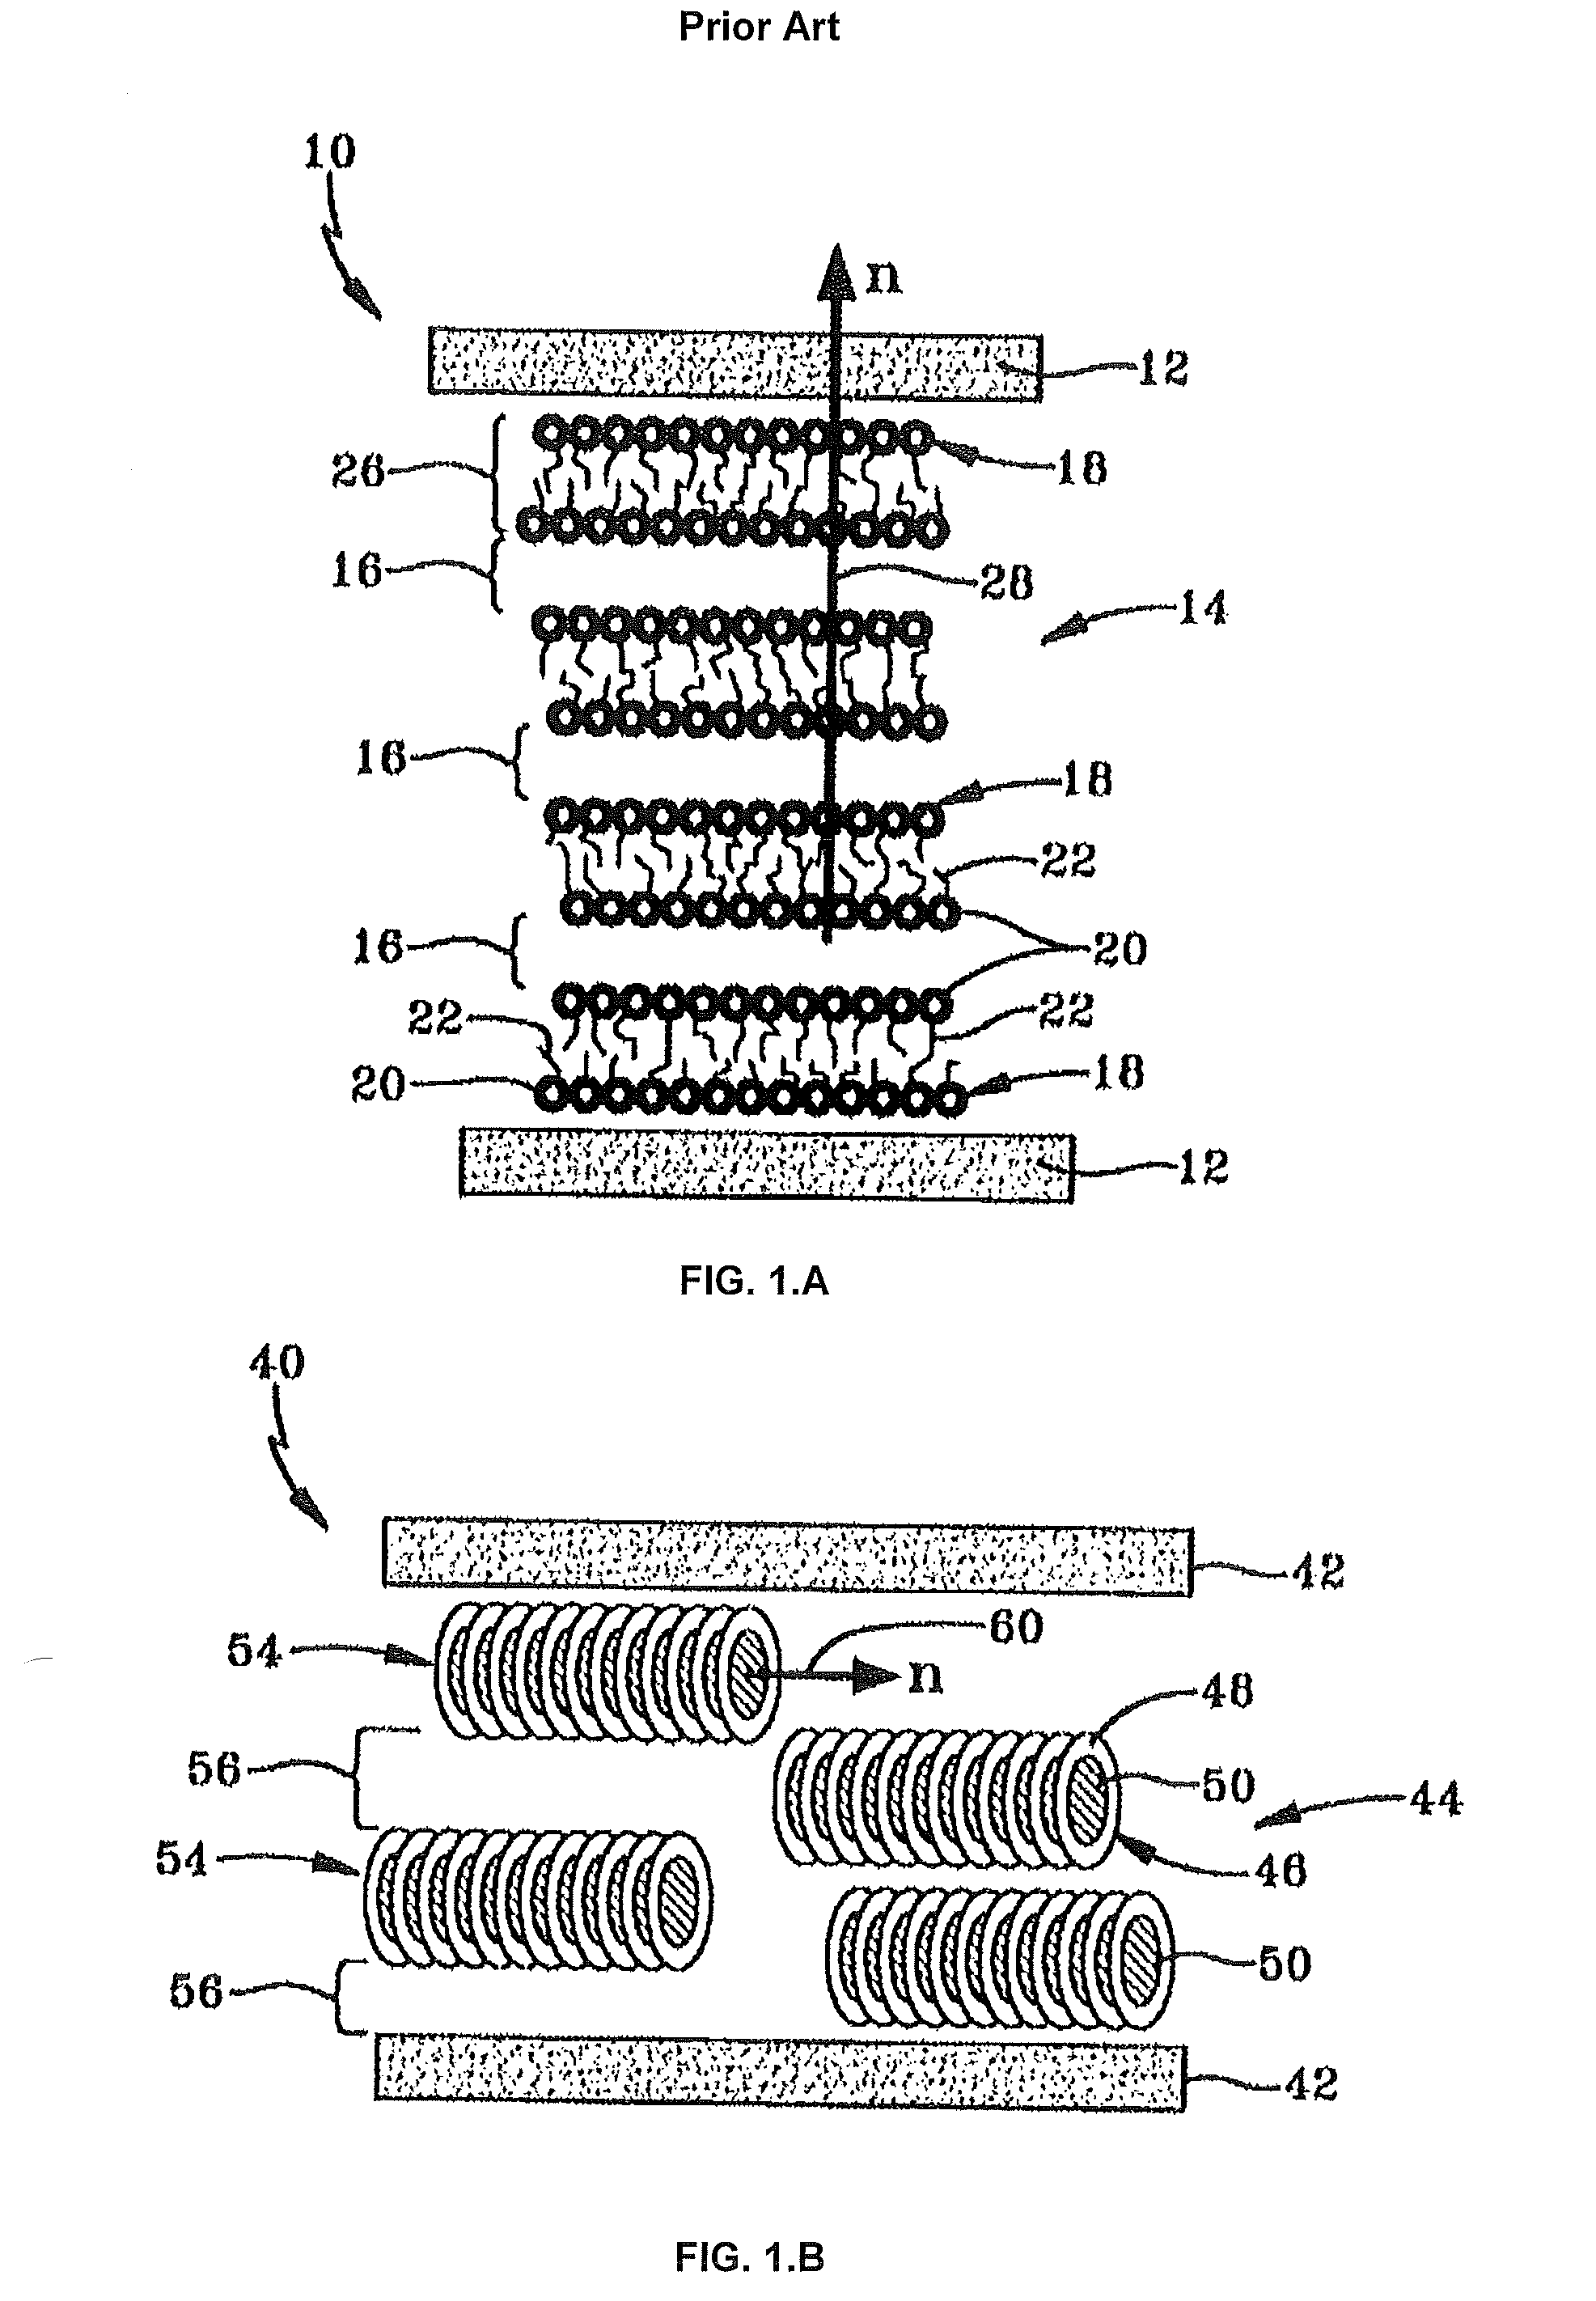 System and Method for Detecting Pathogens on Treated and Untreated Substrates Using Liquid Crystal Chromonic Azo Dye